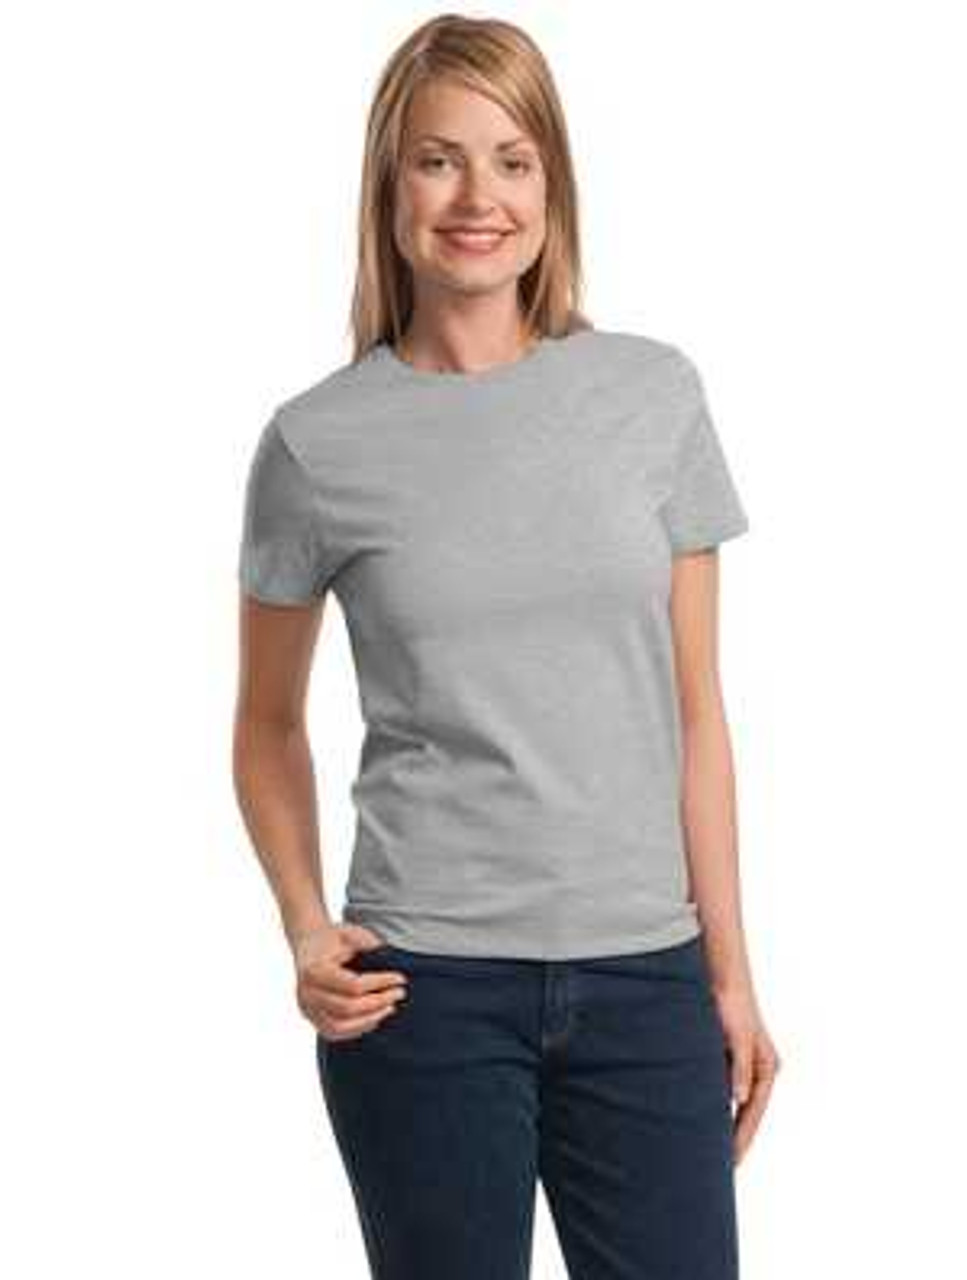 Womens T-Shirts & Tops  Buy womens t-shirts online at SOJOEE